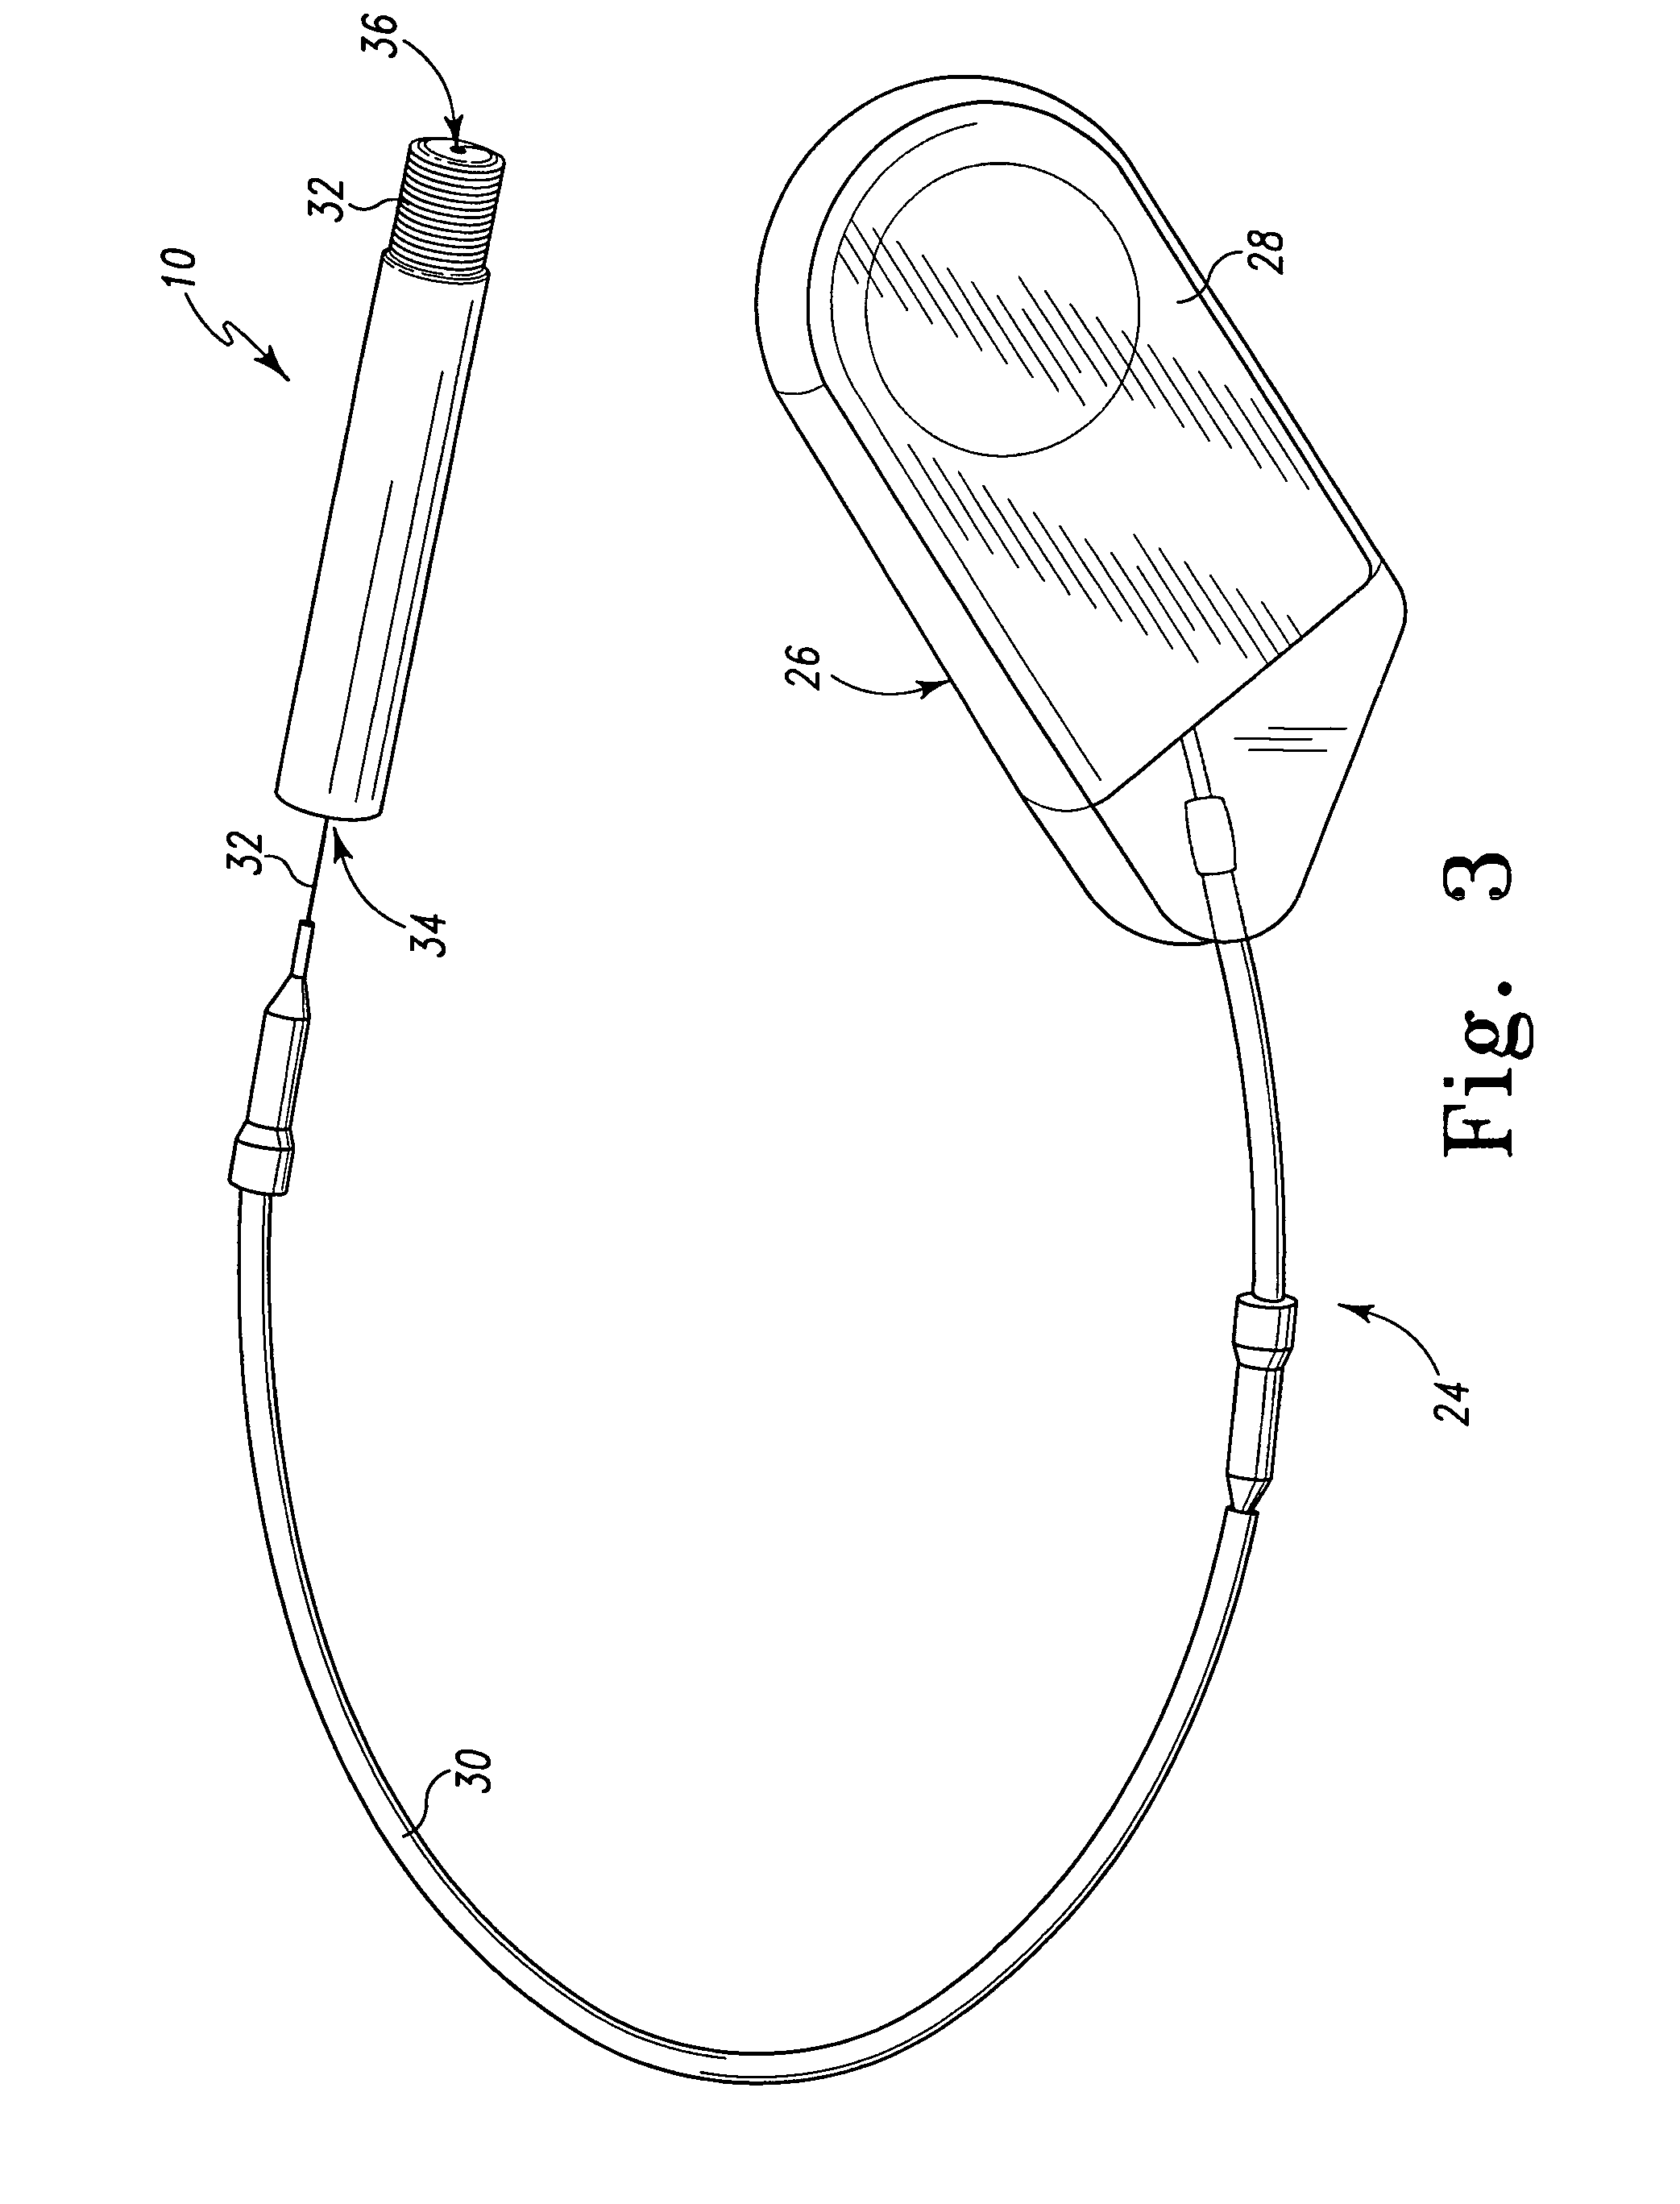 Methods and devices for treatment of osteonecrosis of the femoral head with core decompression